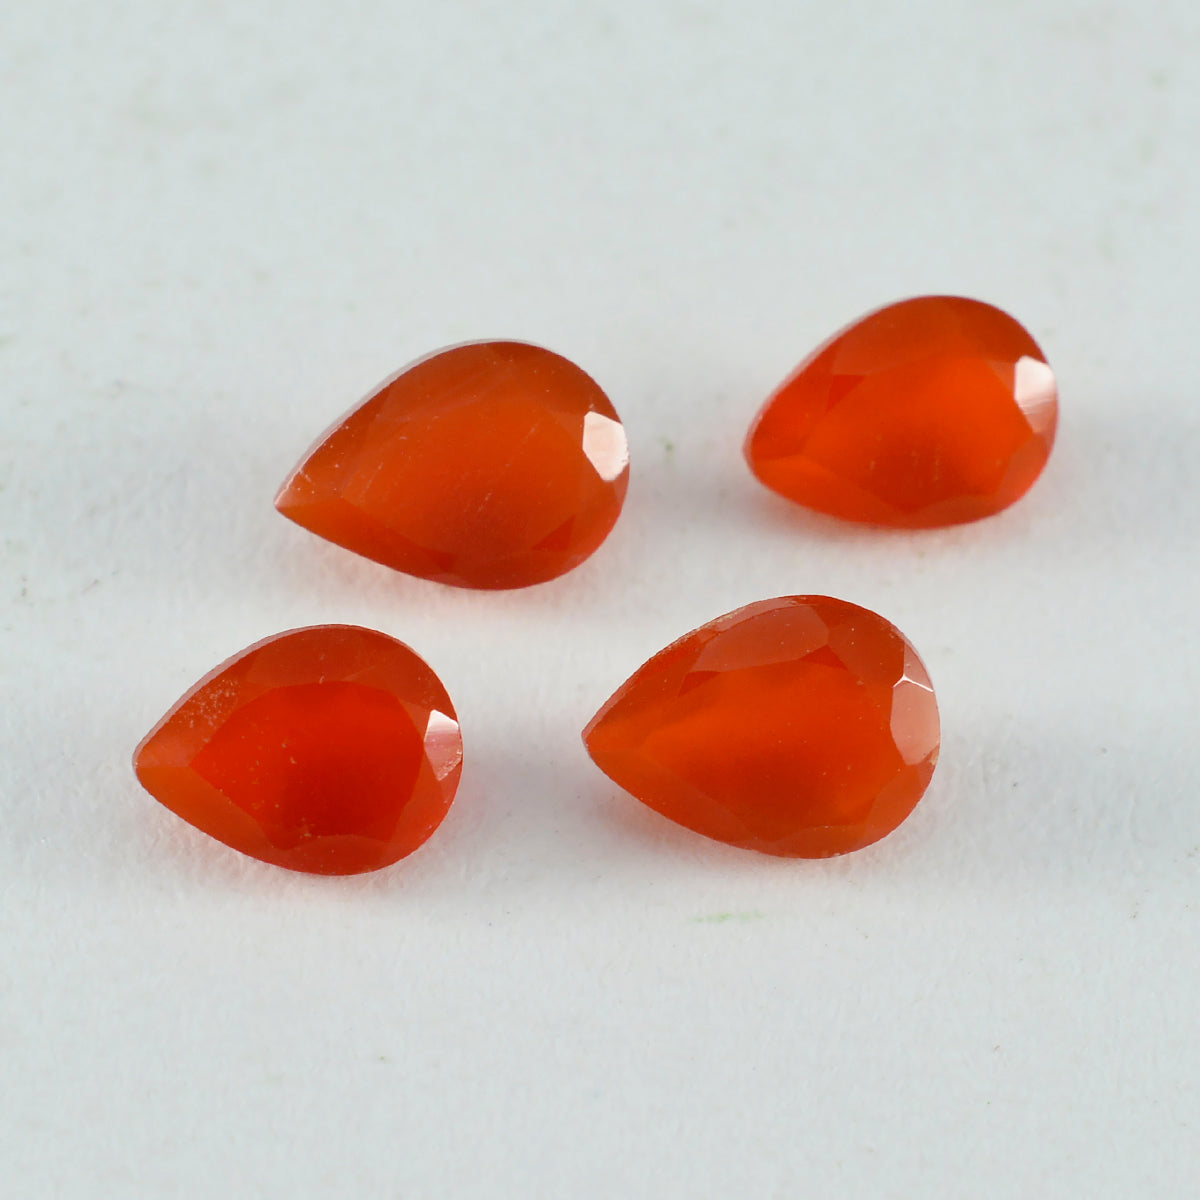 Riyogems 1PC Real Red Onyx Faceted 8x12 mm Pear Shape beauty Quality Gems